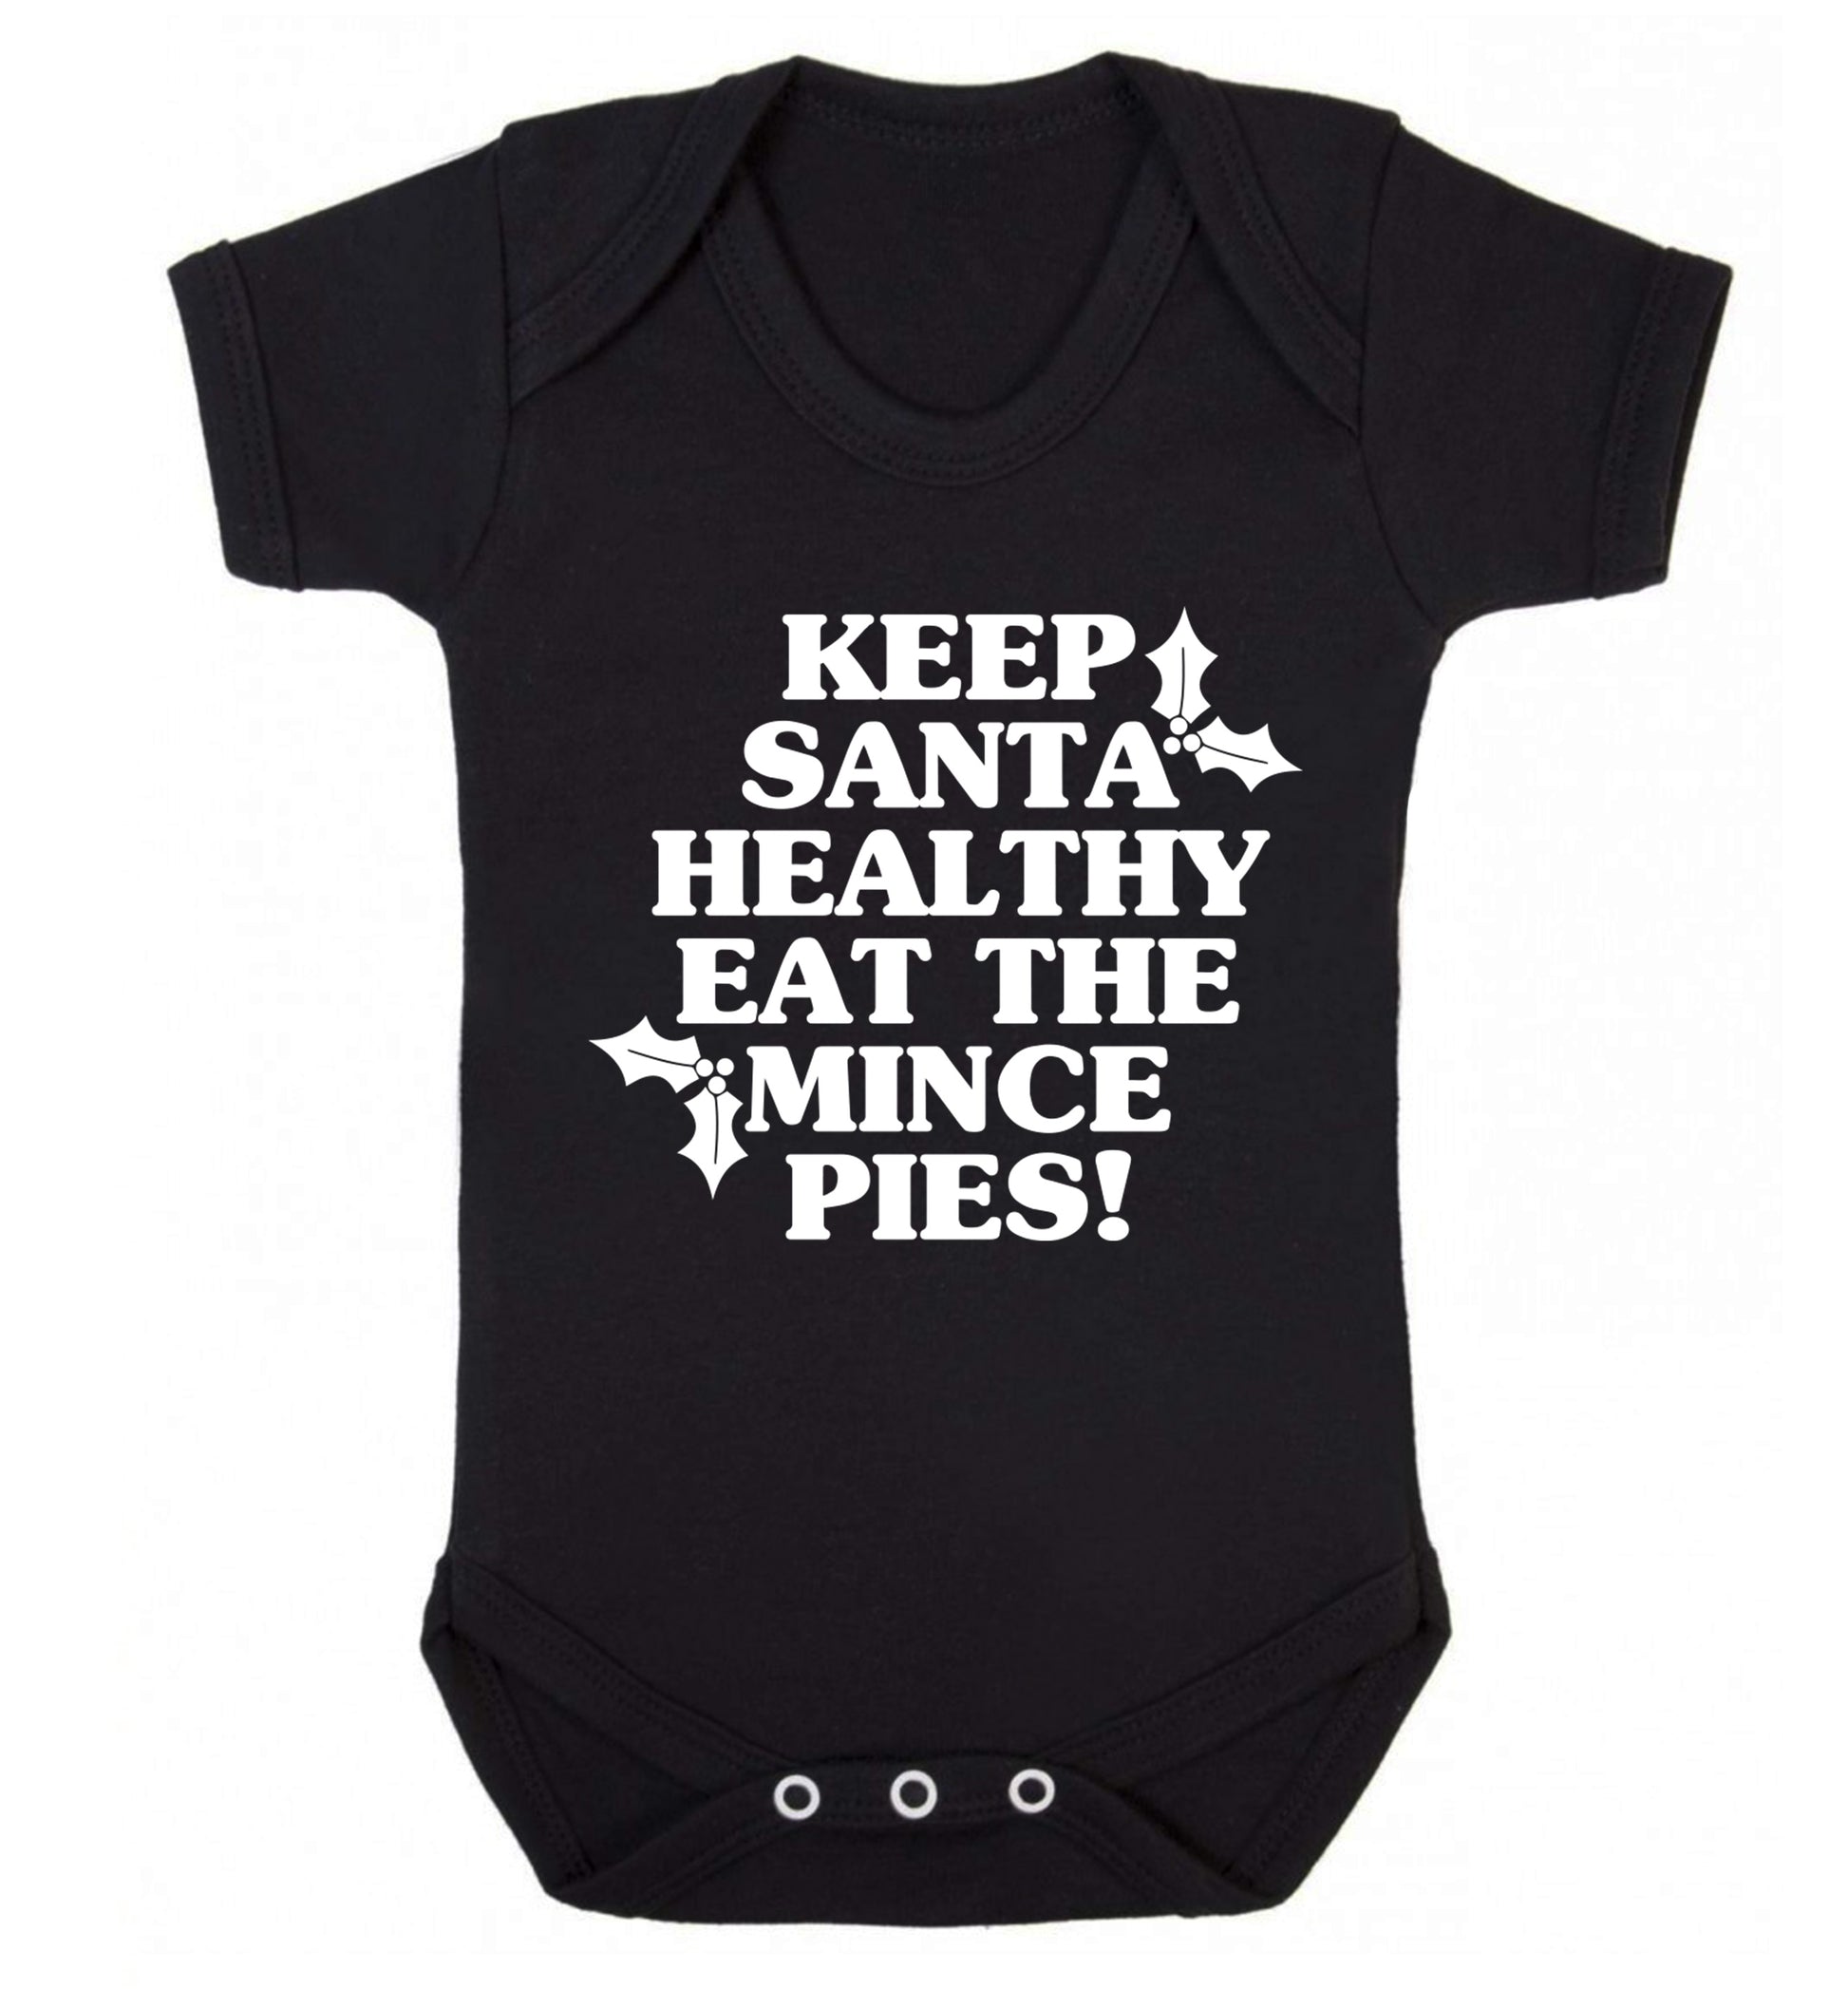 Keep santa healthy eat the mince pies Baby Vest black 18-24 months